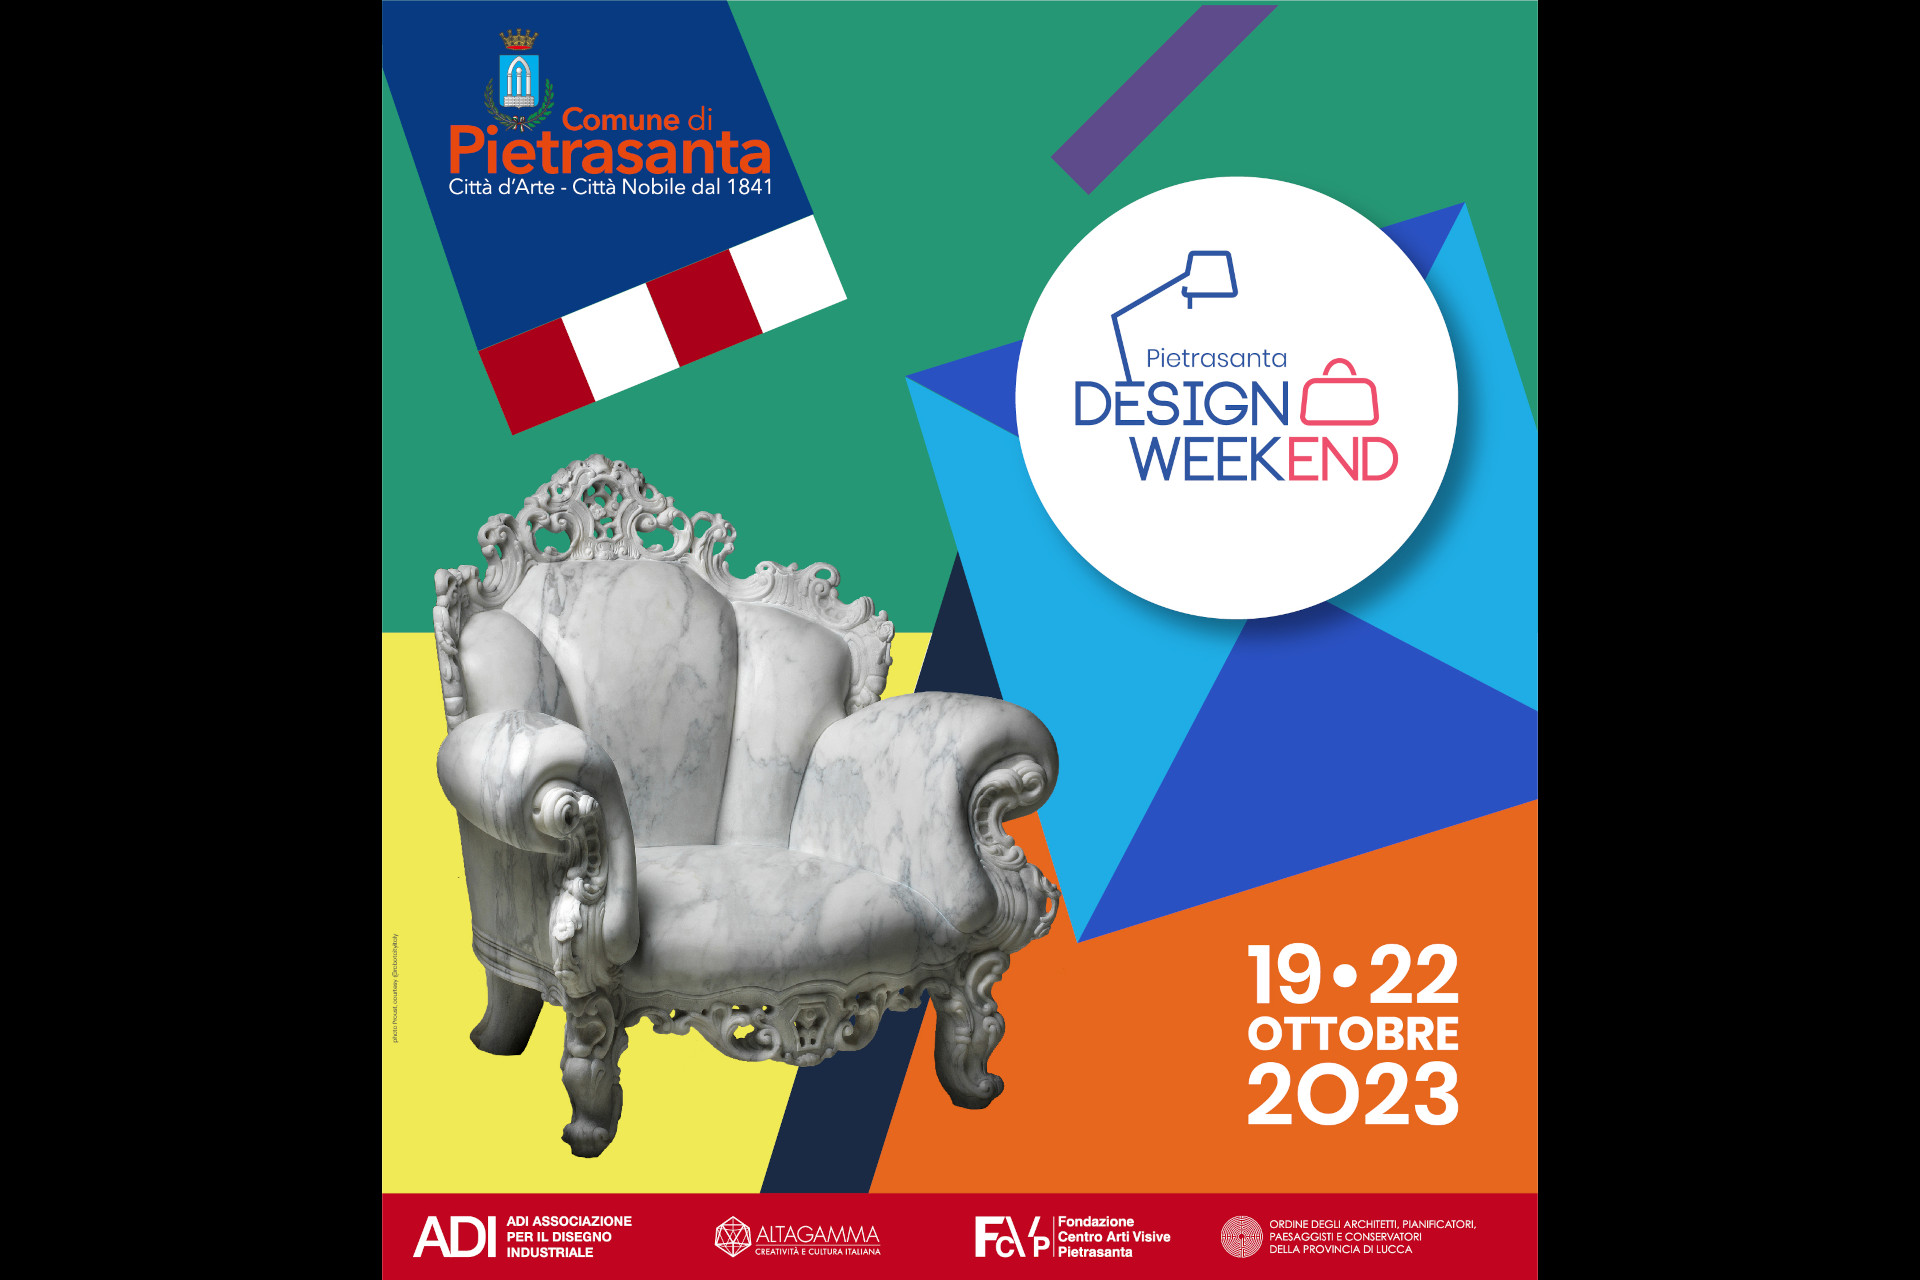 Oluce in the second edition of Pietrasanta Design Week-end